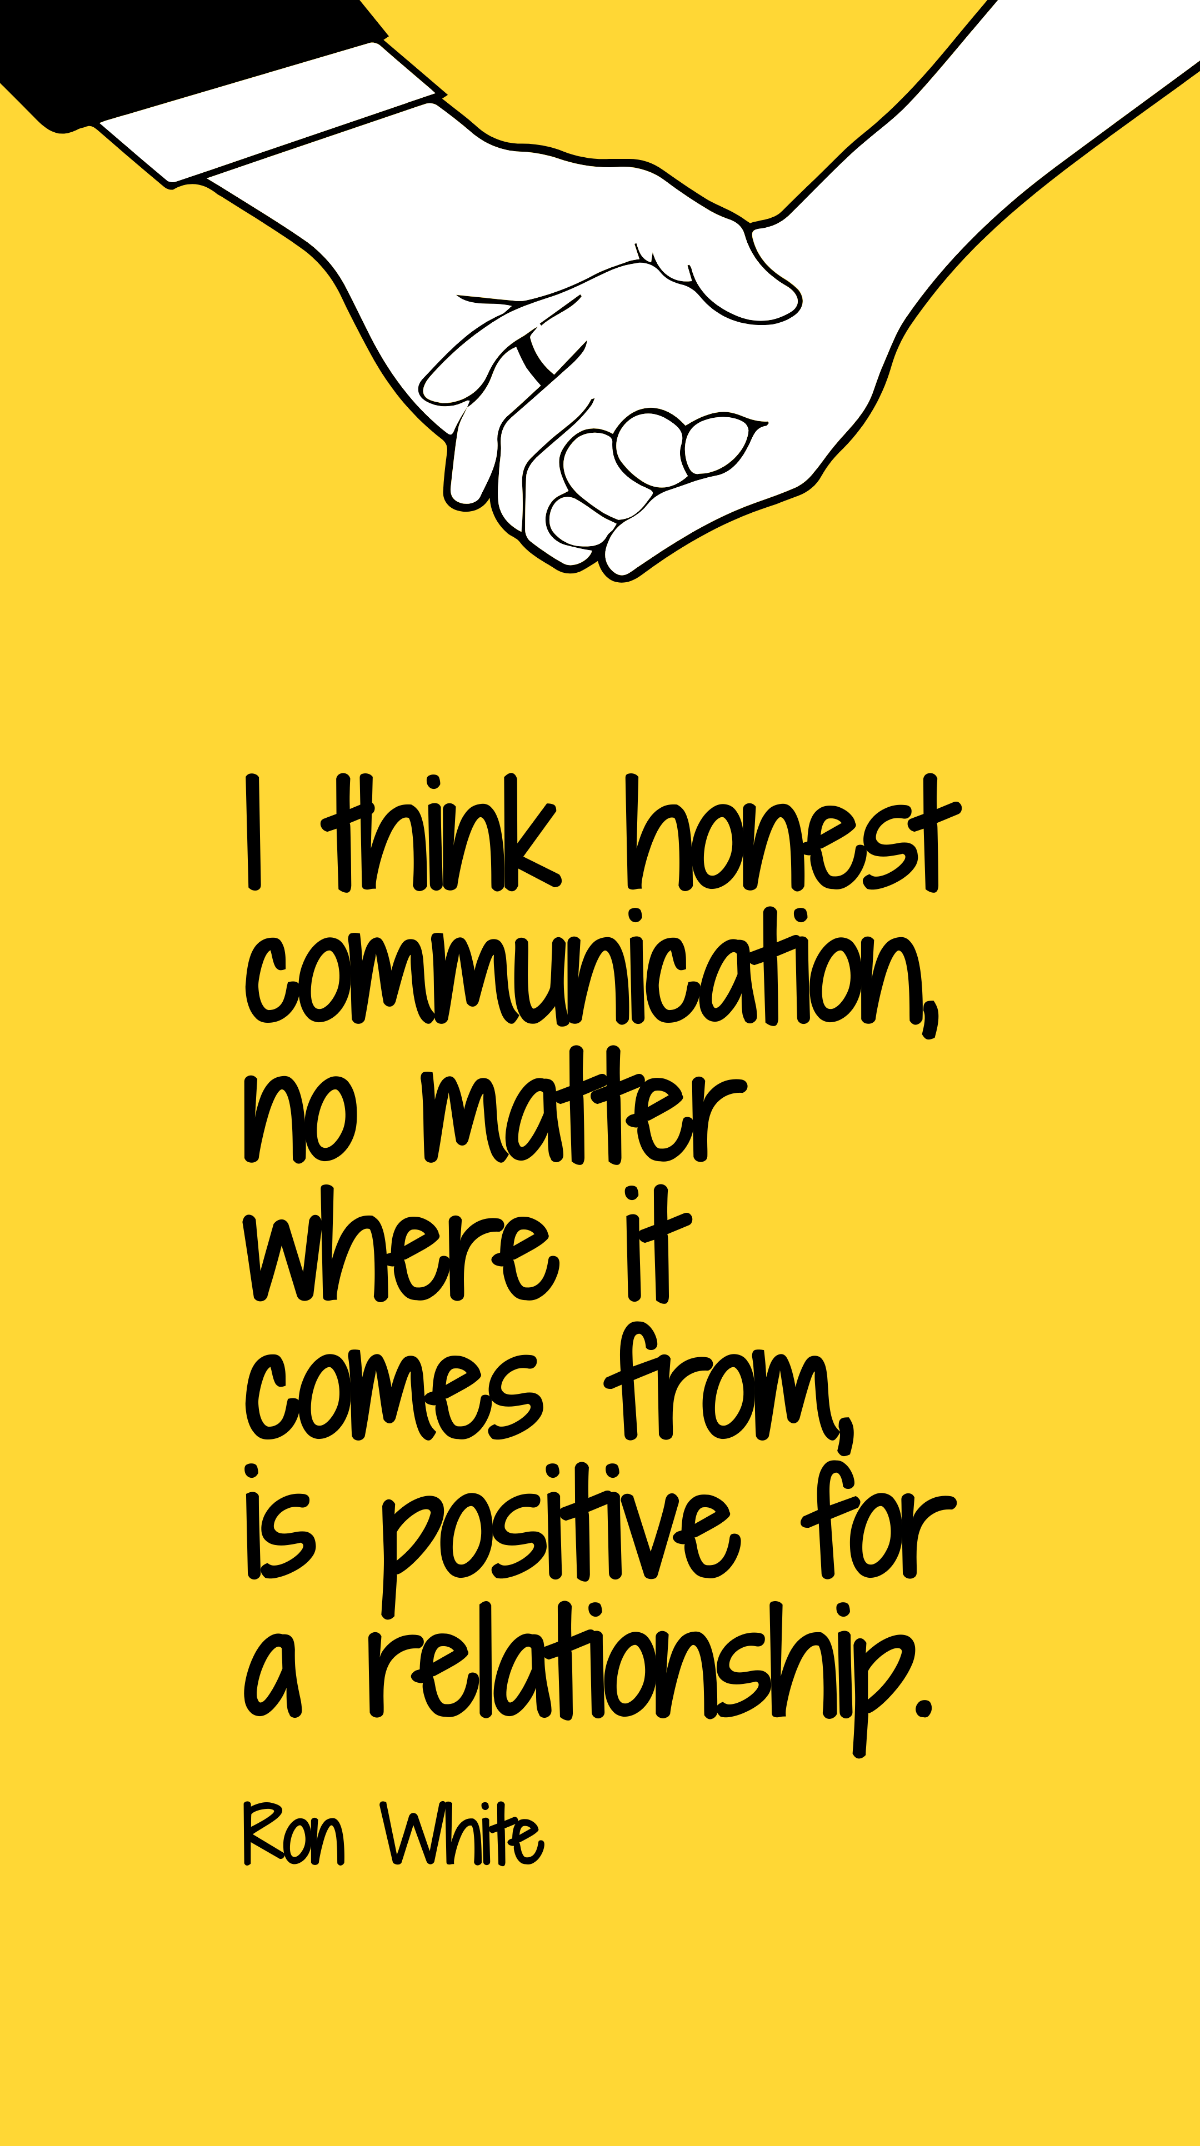 Ron White - I think honest communication, no matter where it comes from, is positive for a relationship. Template